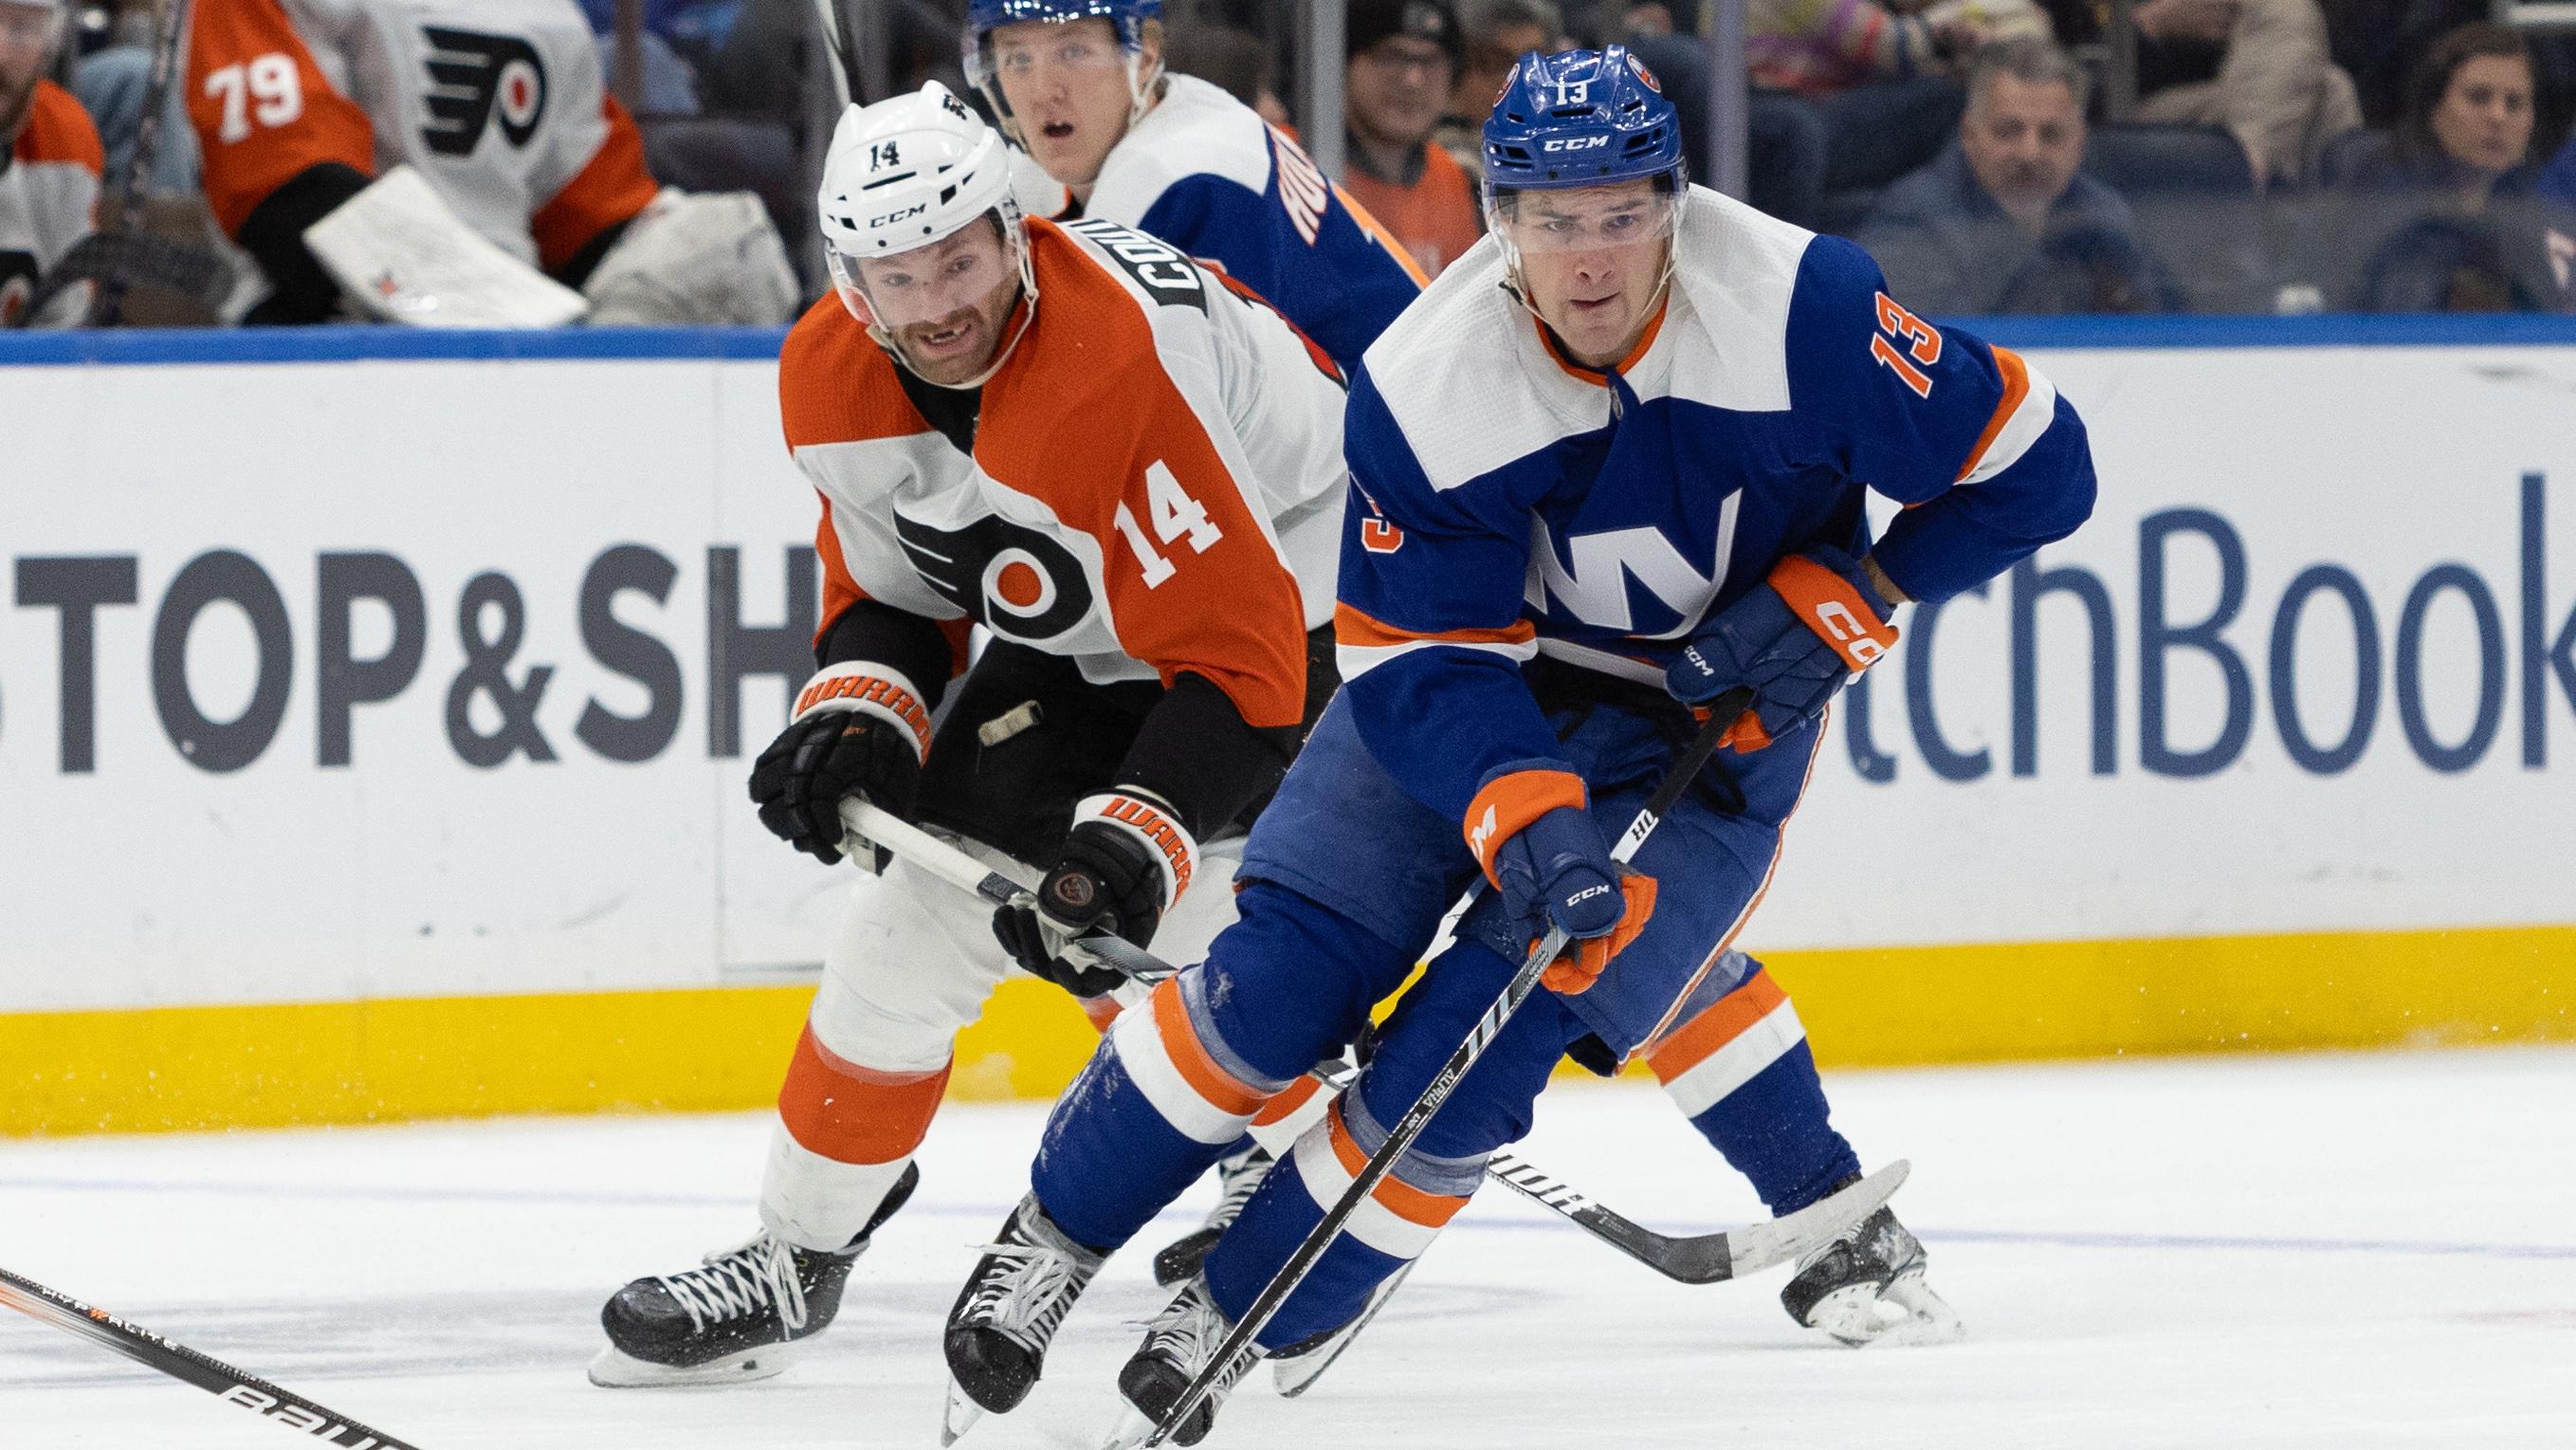 New York Islanders center Mathew Barzal (13) skates with the puck against the Philadelphia Flyers during the second period at UBS Arena. / Thomas Salus-USA TODAY Sports